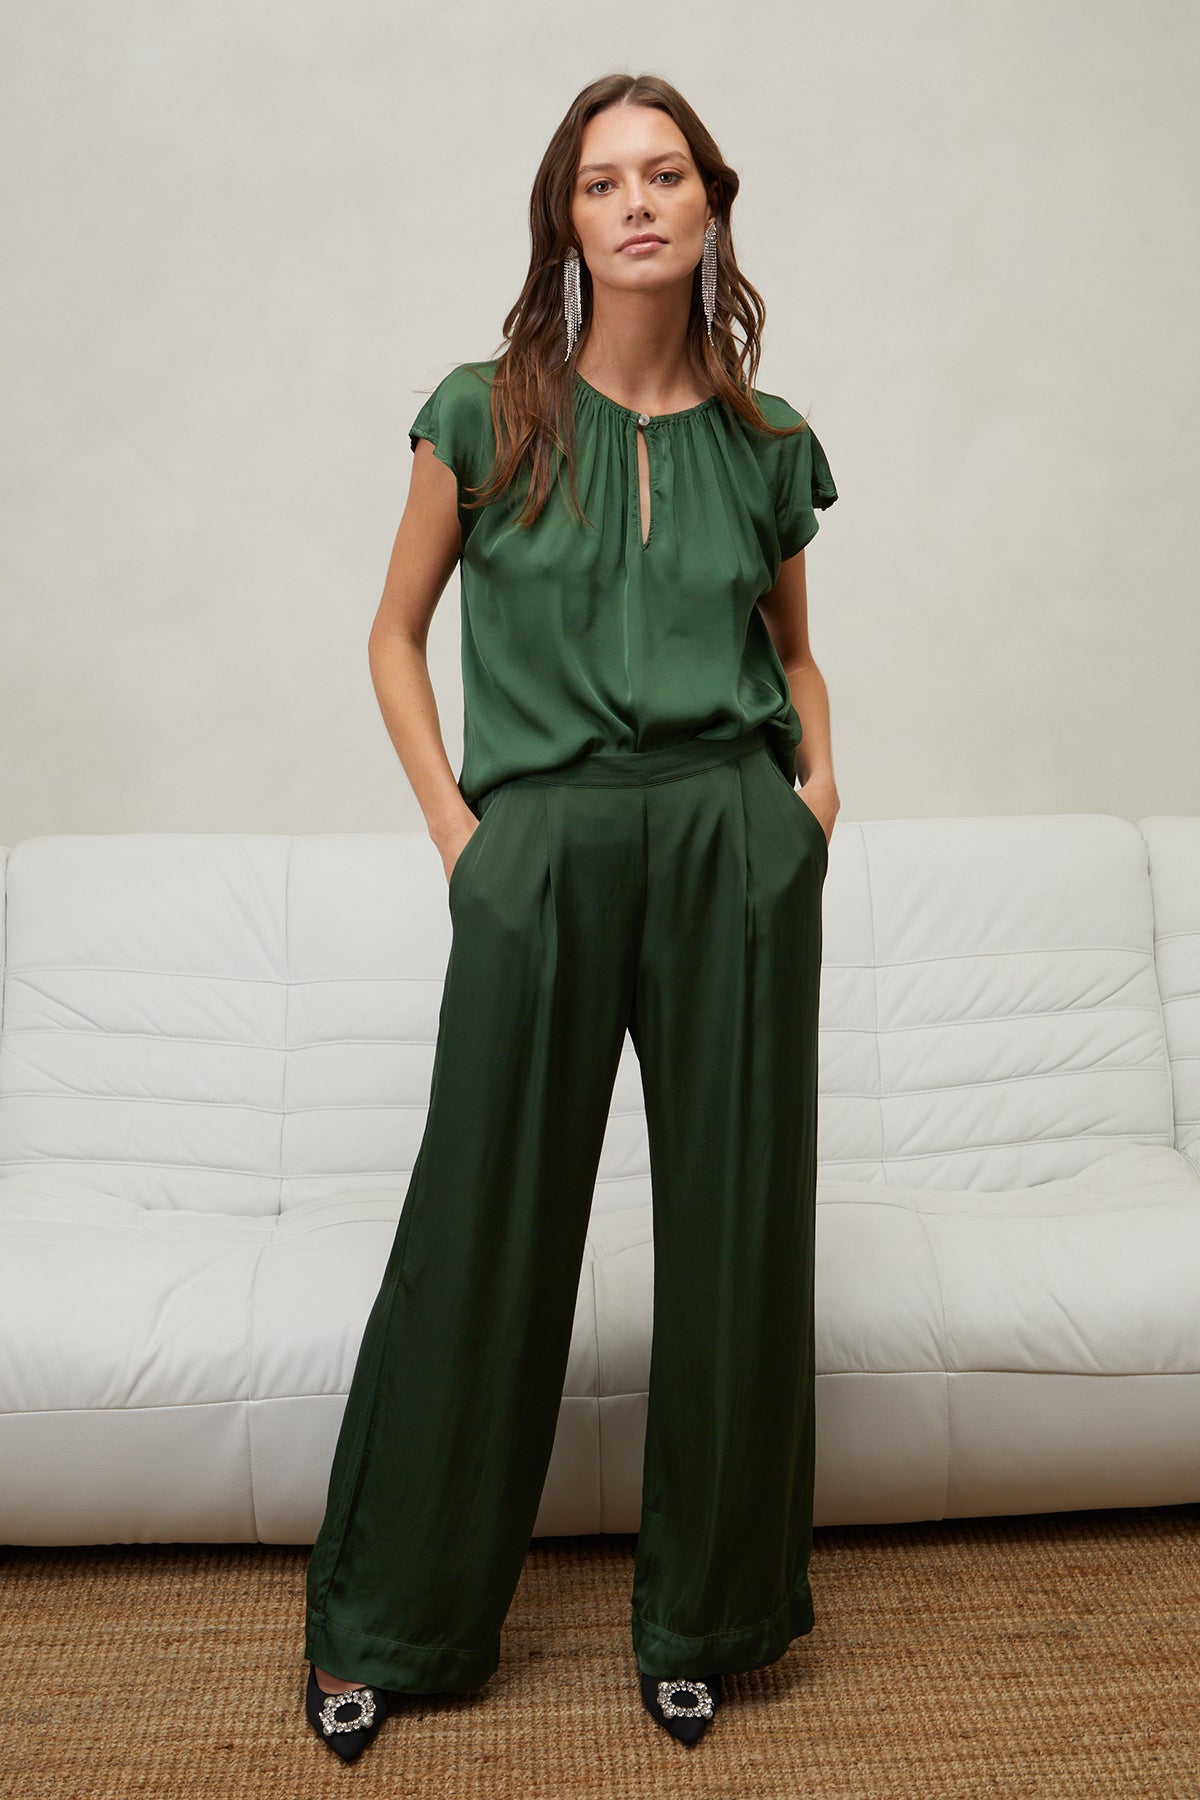 Livi Satin Wide Leg Pant in fern green with Odette top full length front-25676854264001